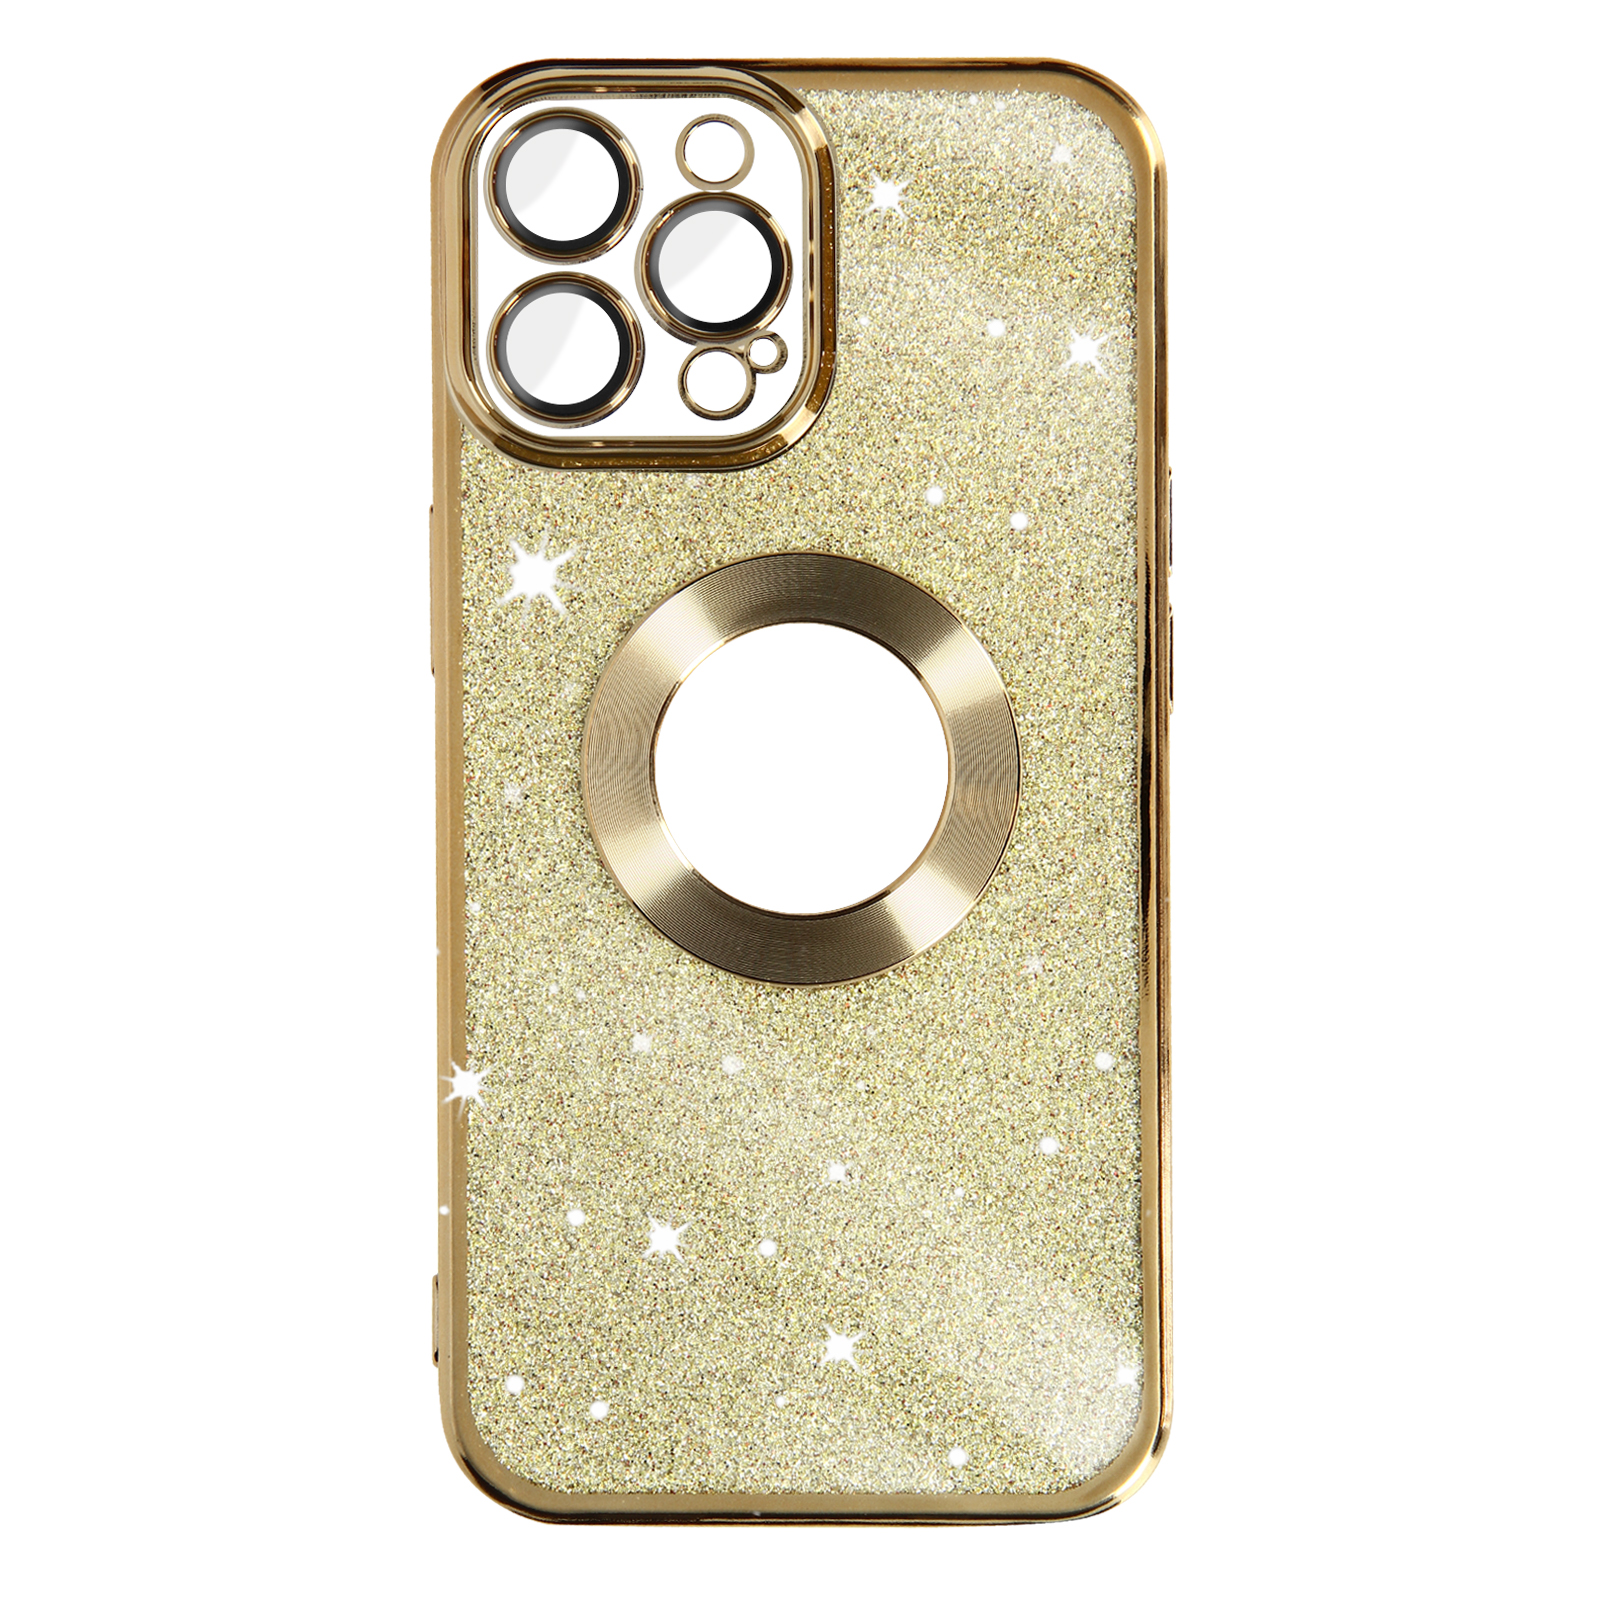 Gold Backcover, AVIZAR Protecam Pro, 12 Series, iPhone Apple, Spark